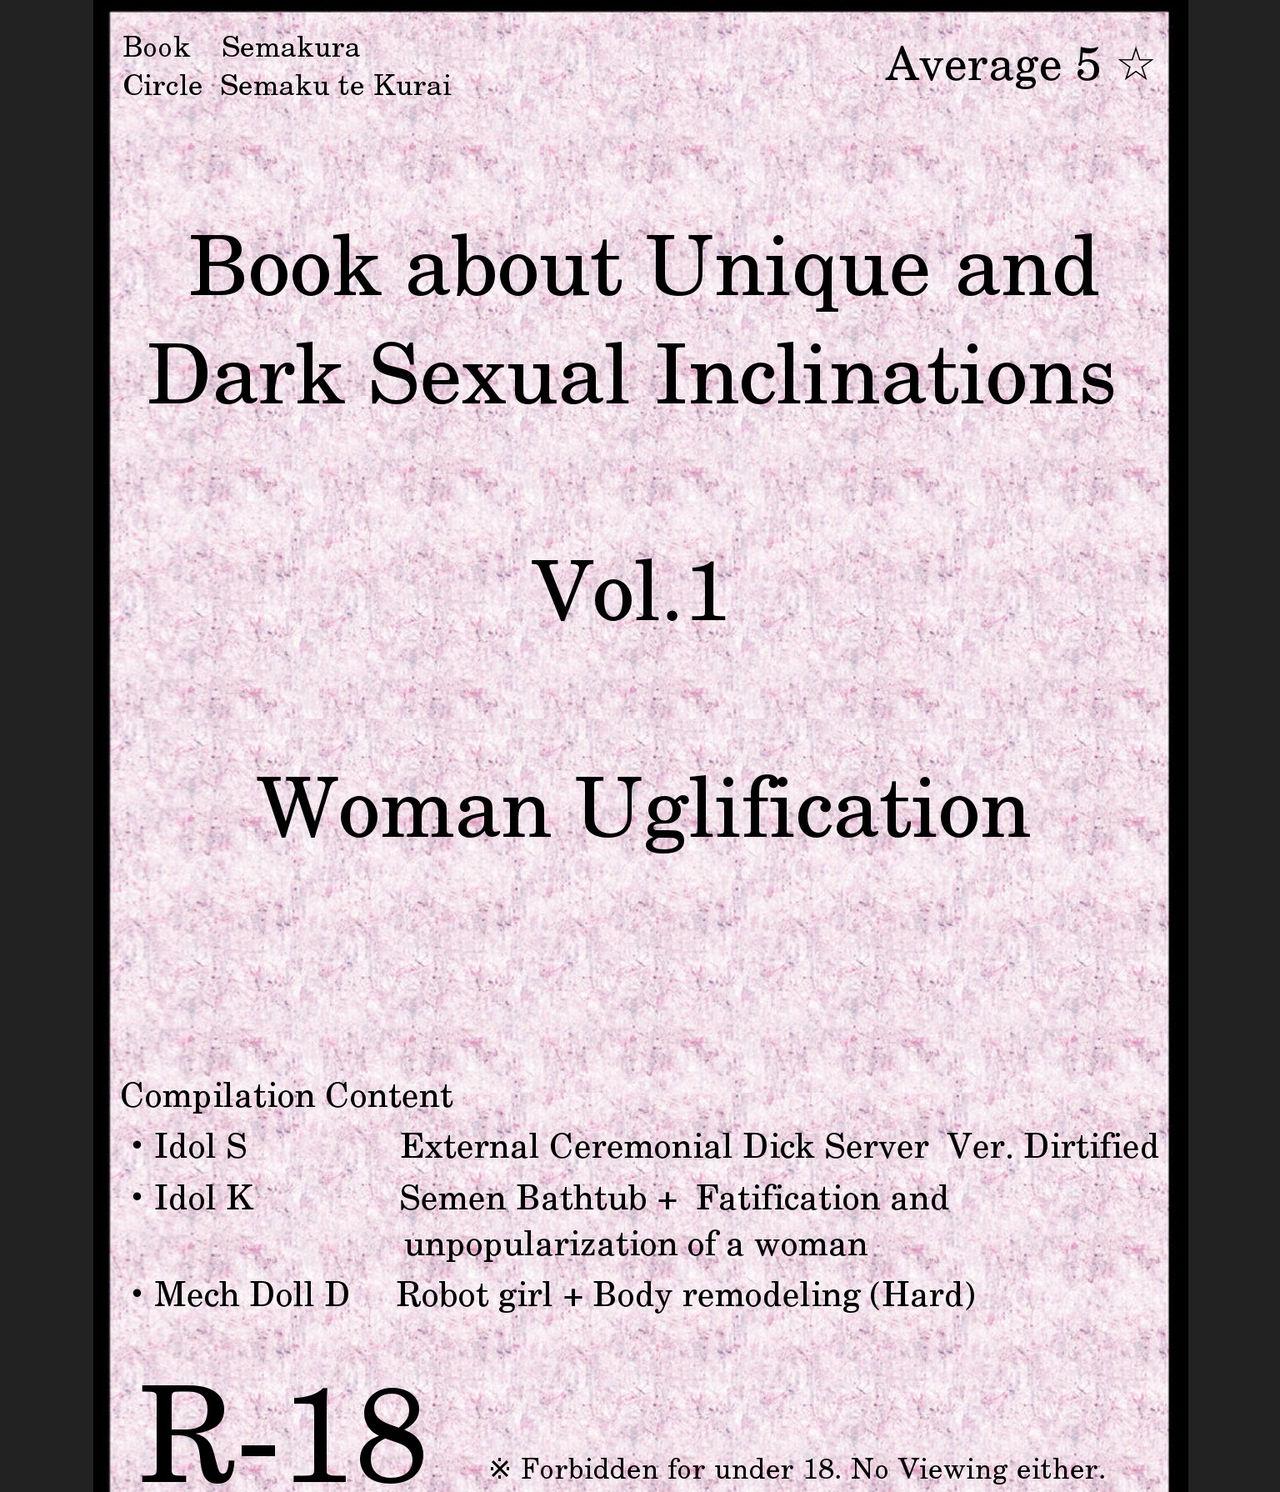 Book about Narrow and Dark Sexual Inclinations Vol.1 Uglification 0